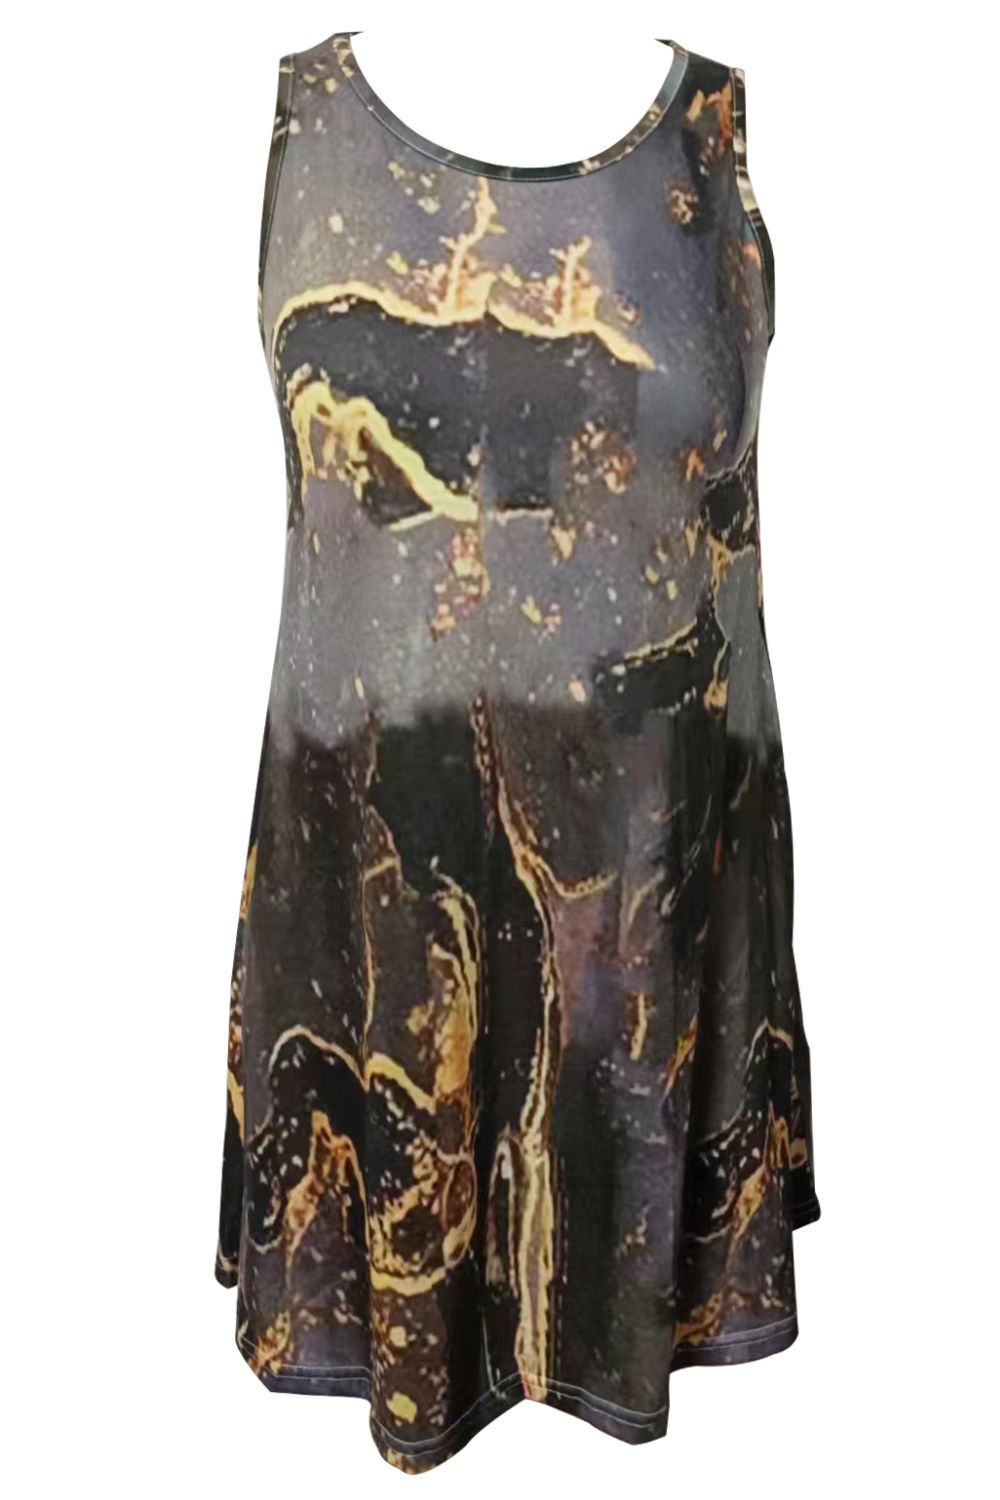 Abstract Print Round Neck Sleeveless Dress with Pockets - Runway Frenzy